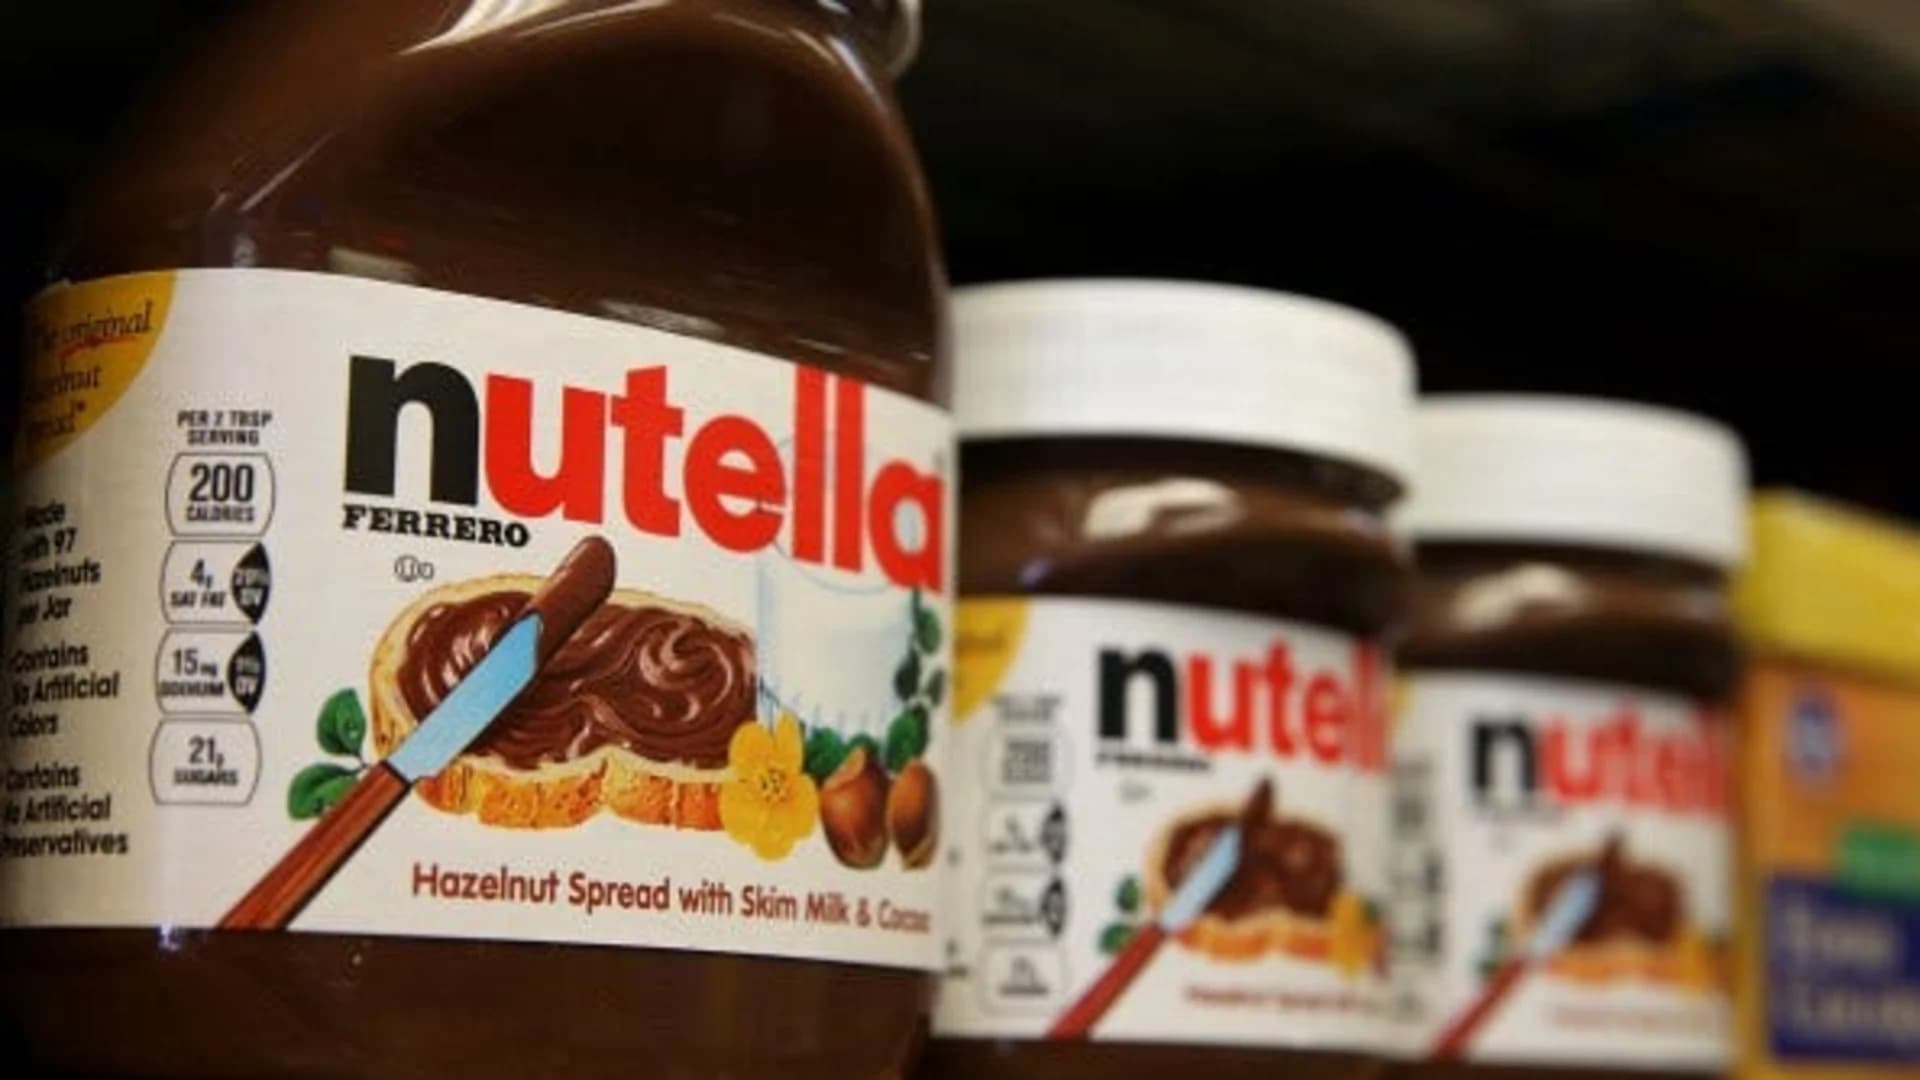 Nutella named New York’s favorite condiment